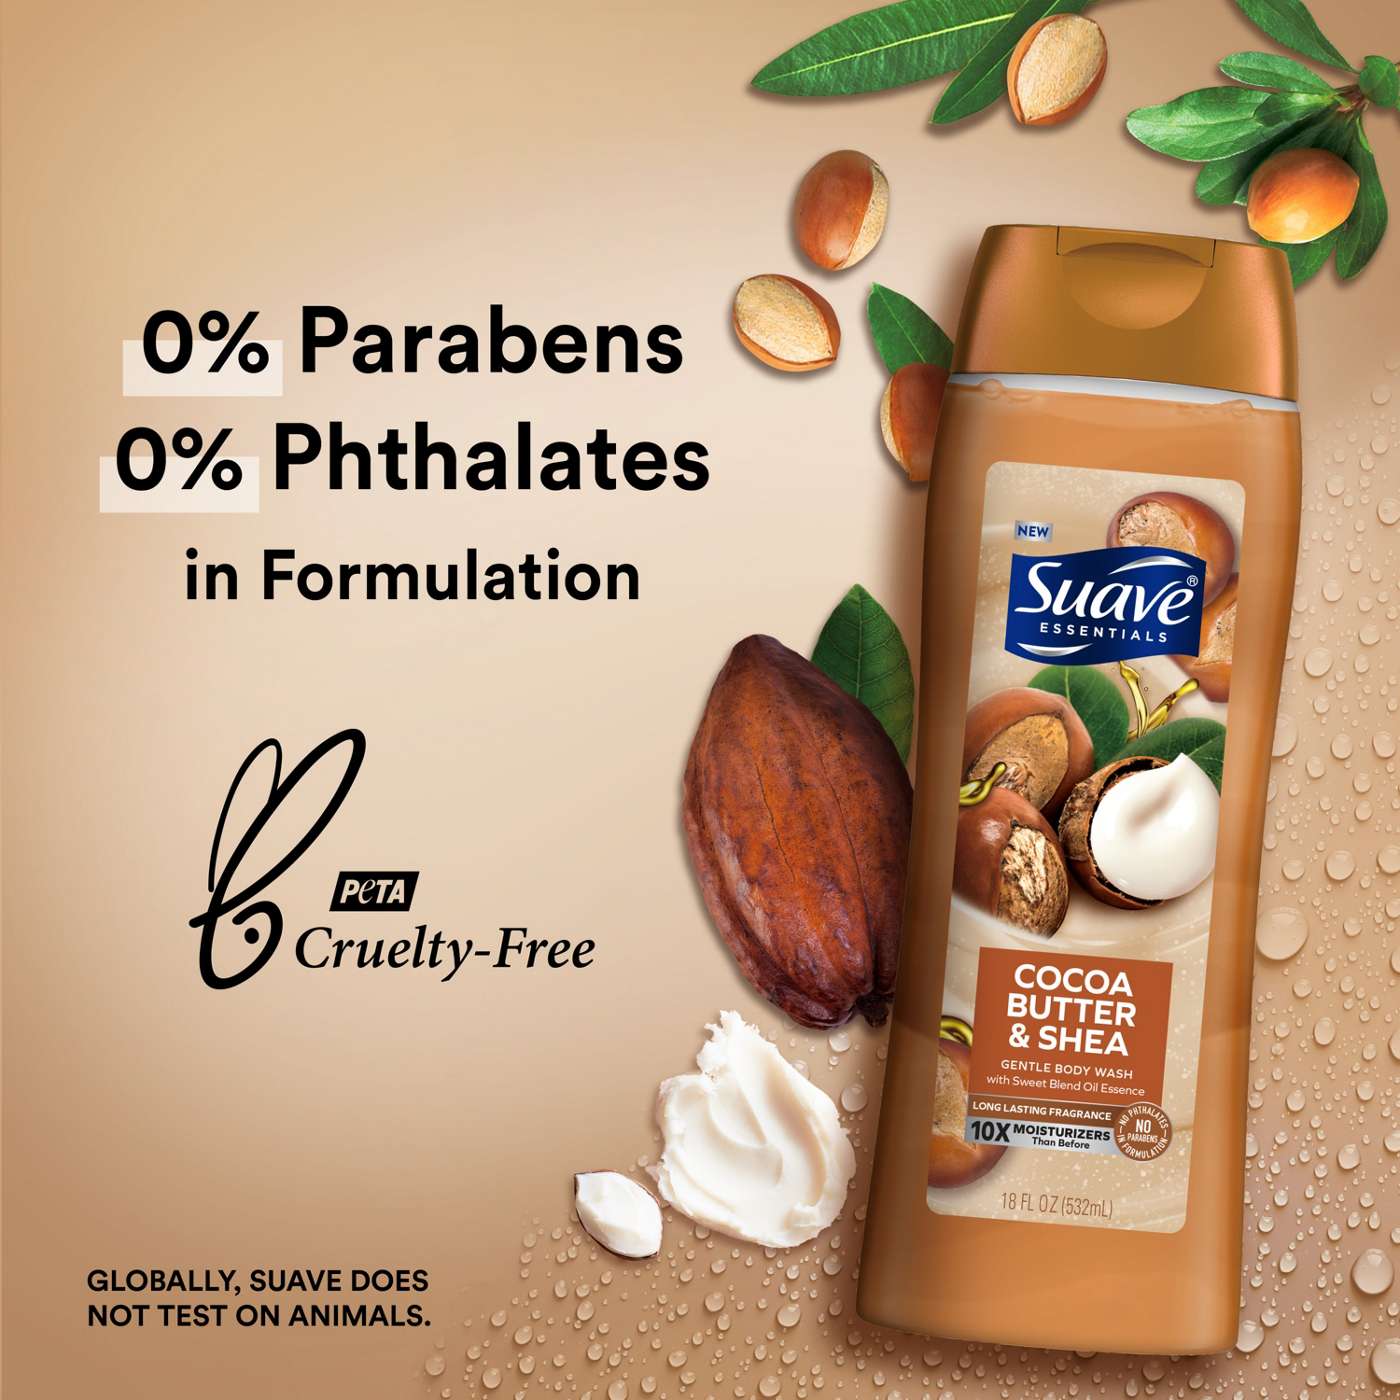 Suave Essentials Gentle Body Wash, Cocoa Butter & Shea; image 4 of 7